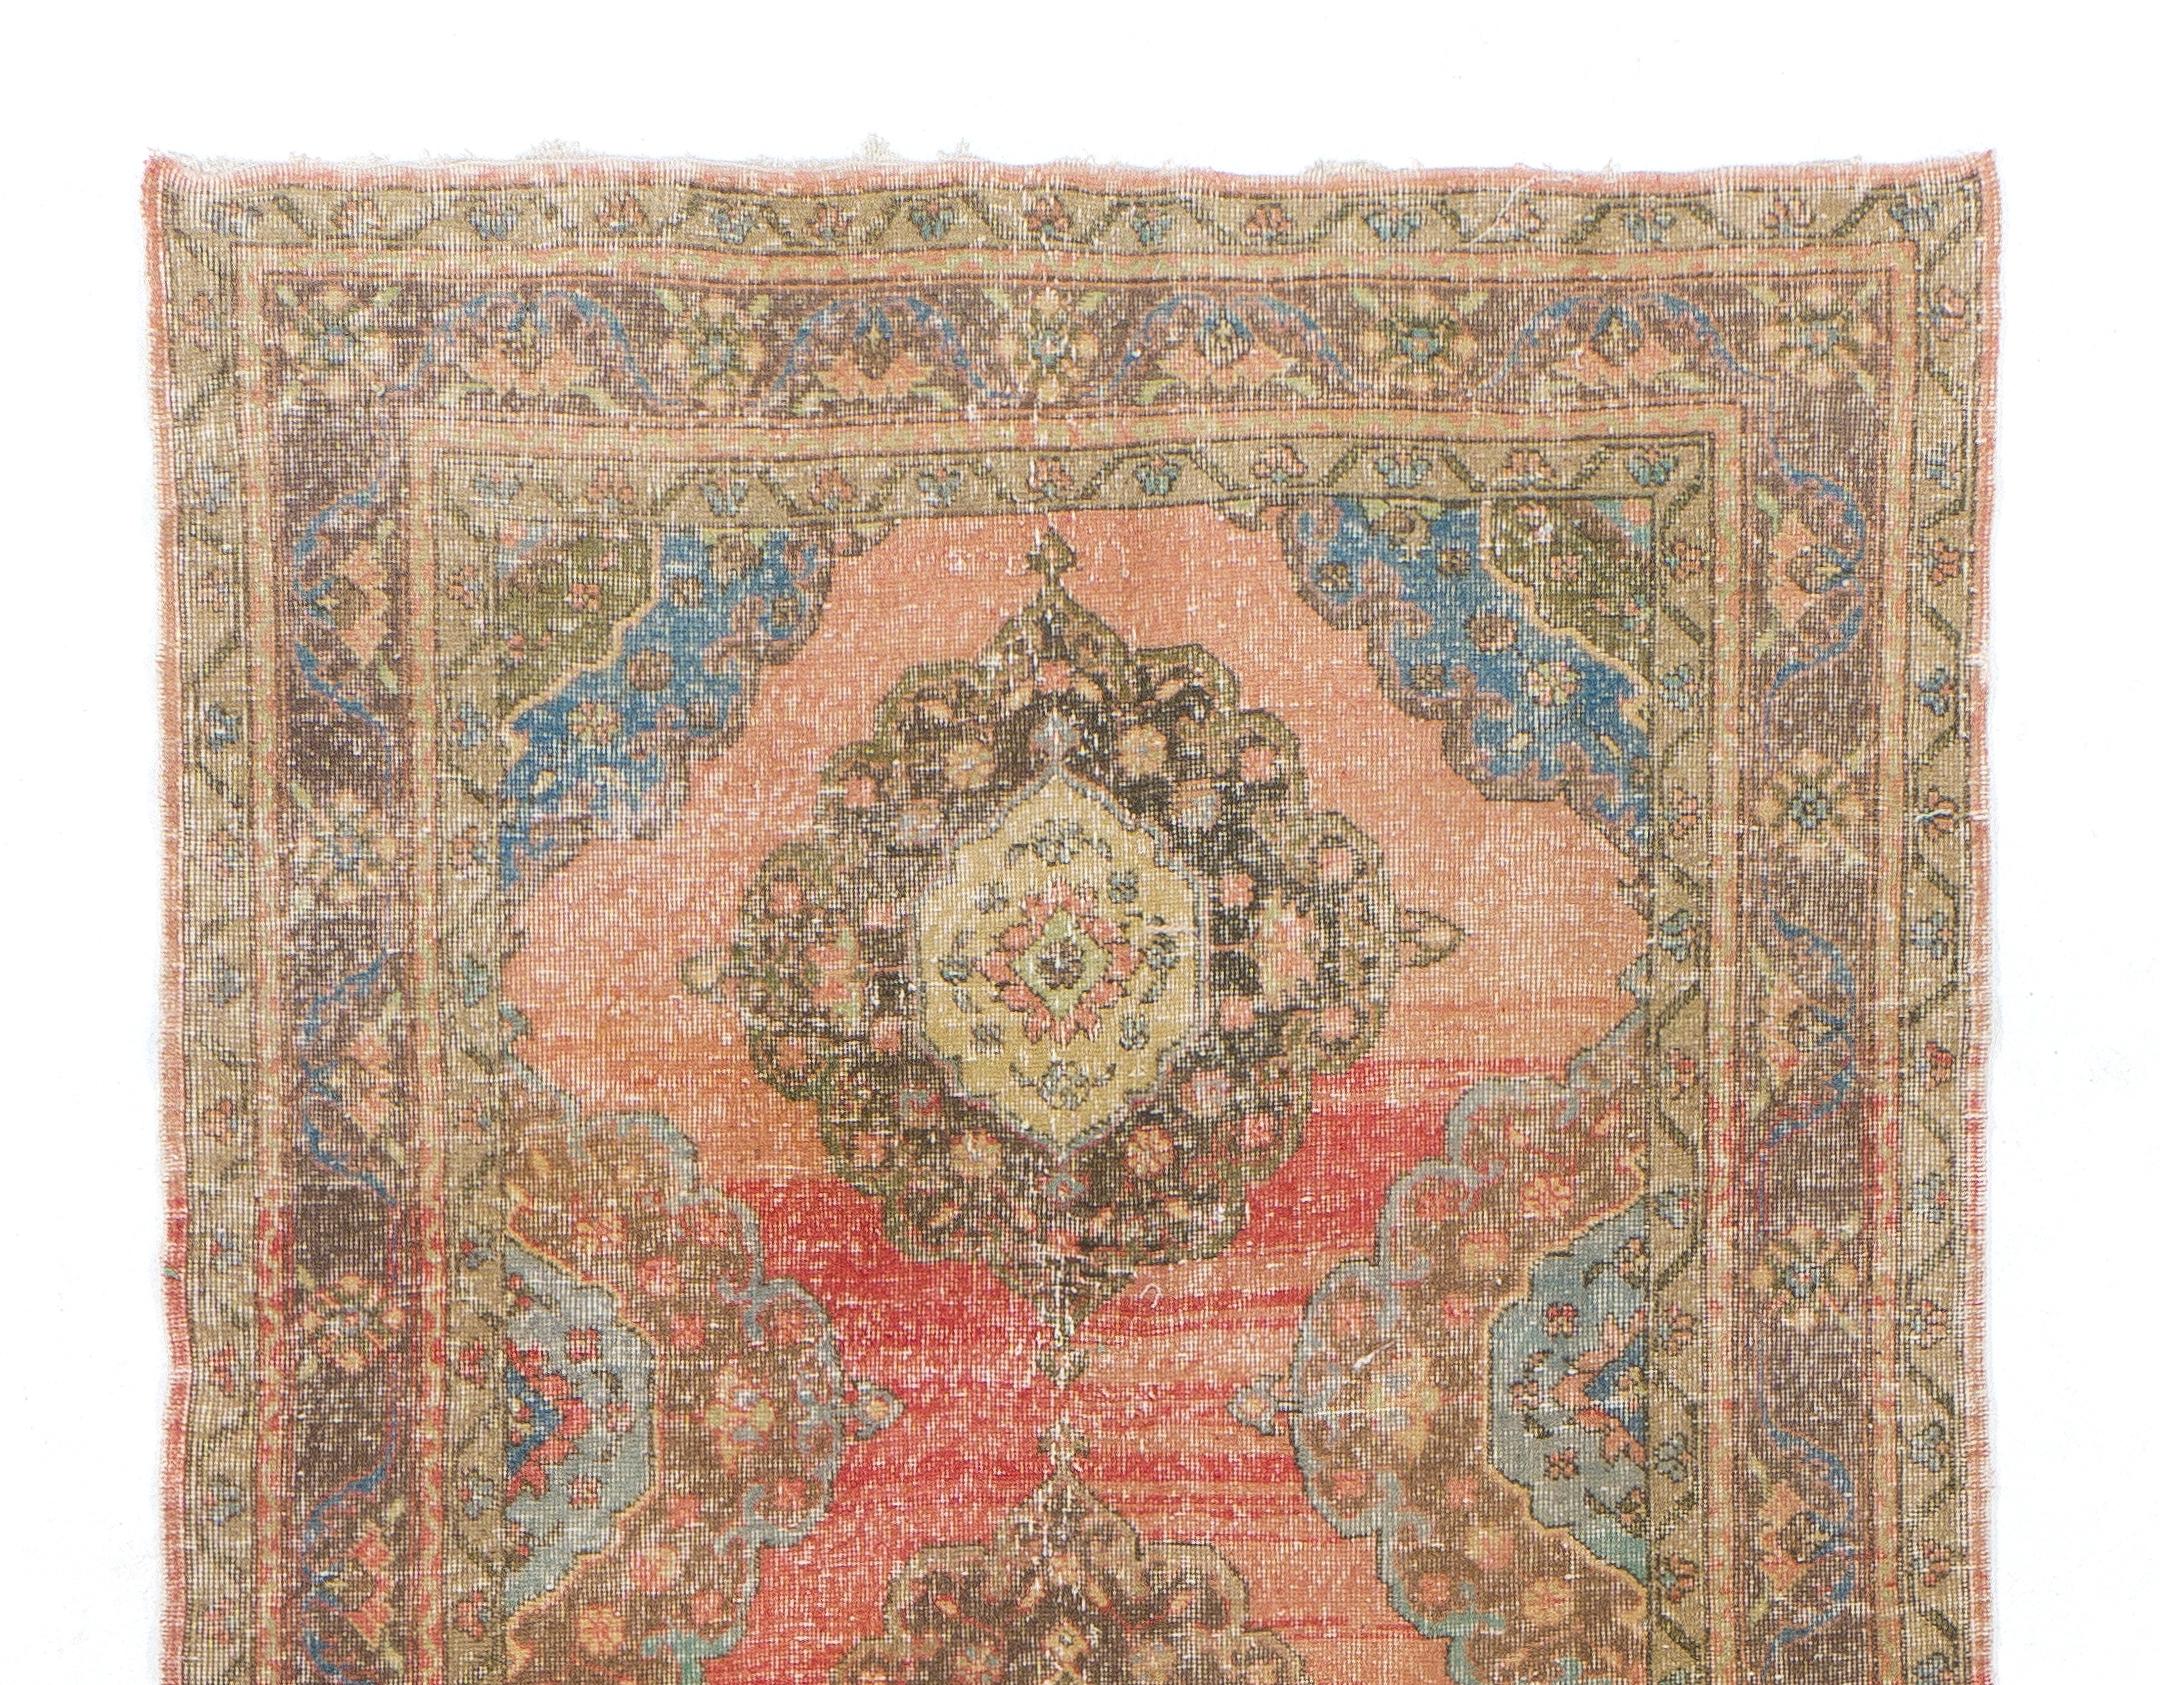 An early 20th century hand knotted runner from Central Anatolia with pleasing natural colors and wool pile on wool foundation.

Good condition, sturdy and as clean as a brand new rug. 
Size: 4.6x12.5 Ft.